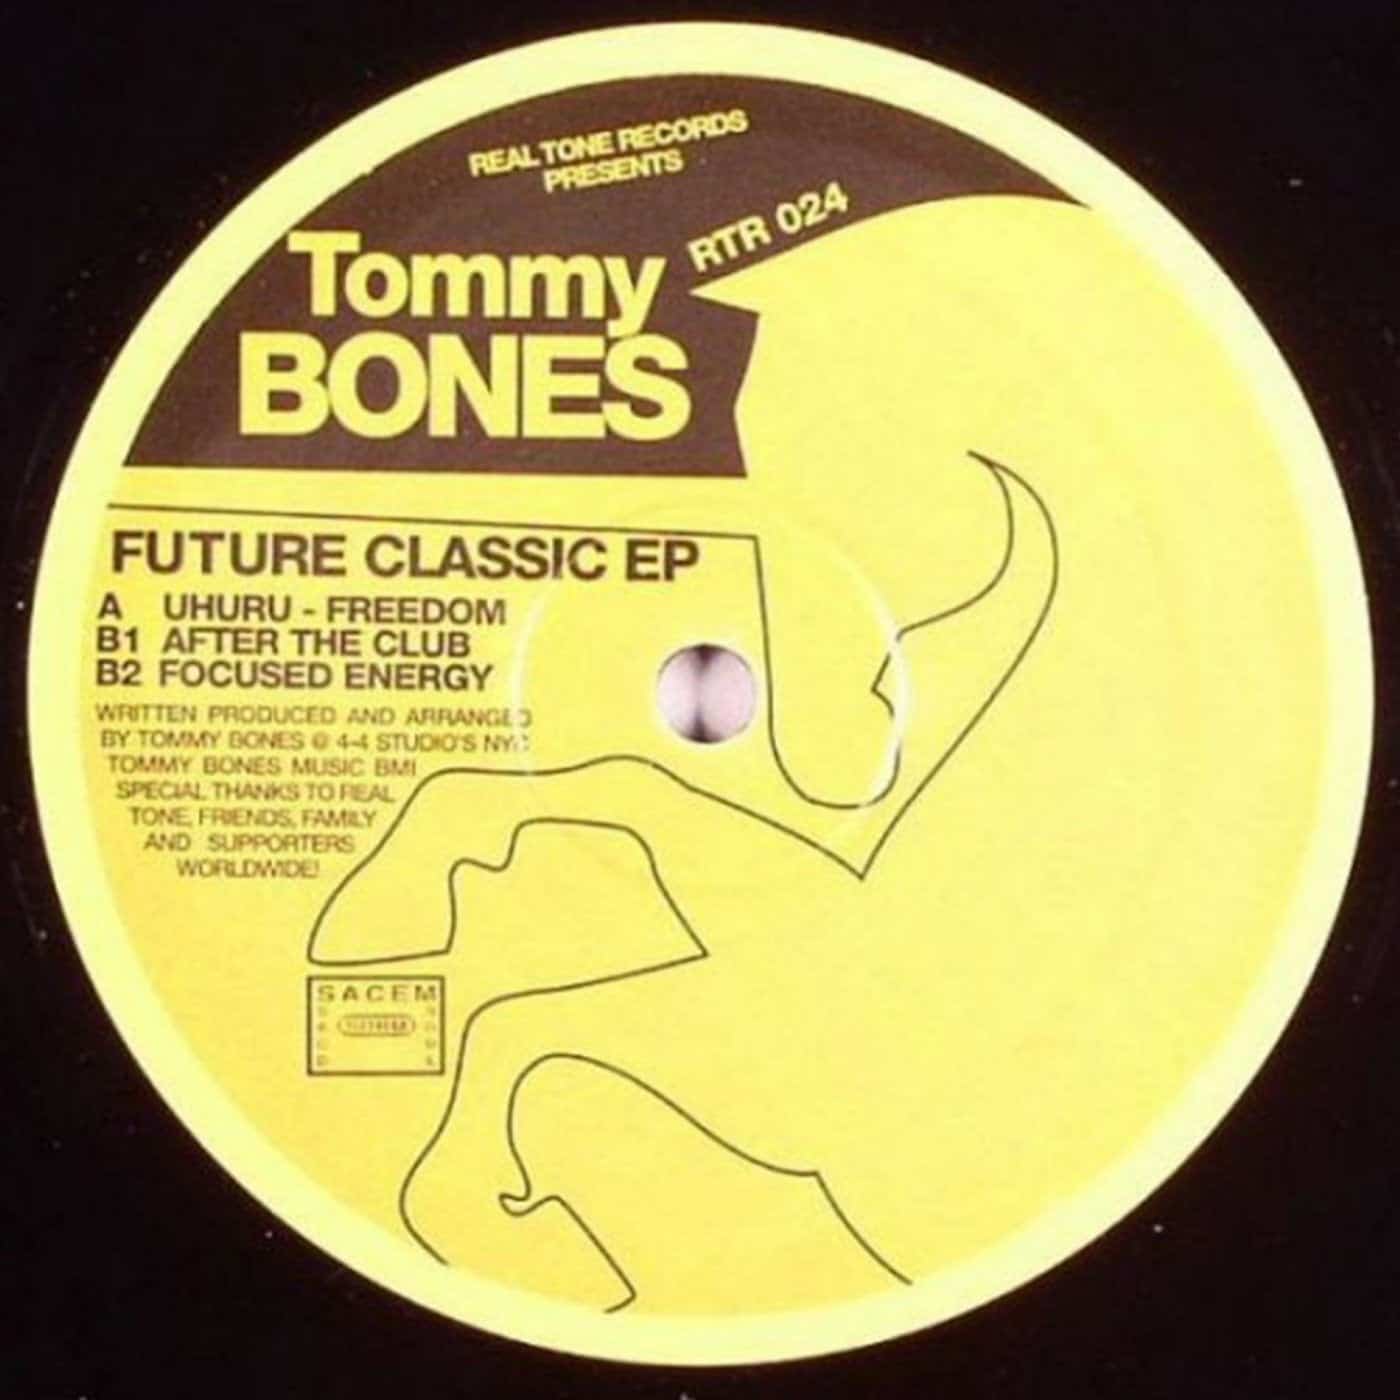 image cover: Tommy Bones - Future Classic EP / RTR024